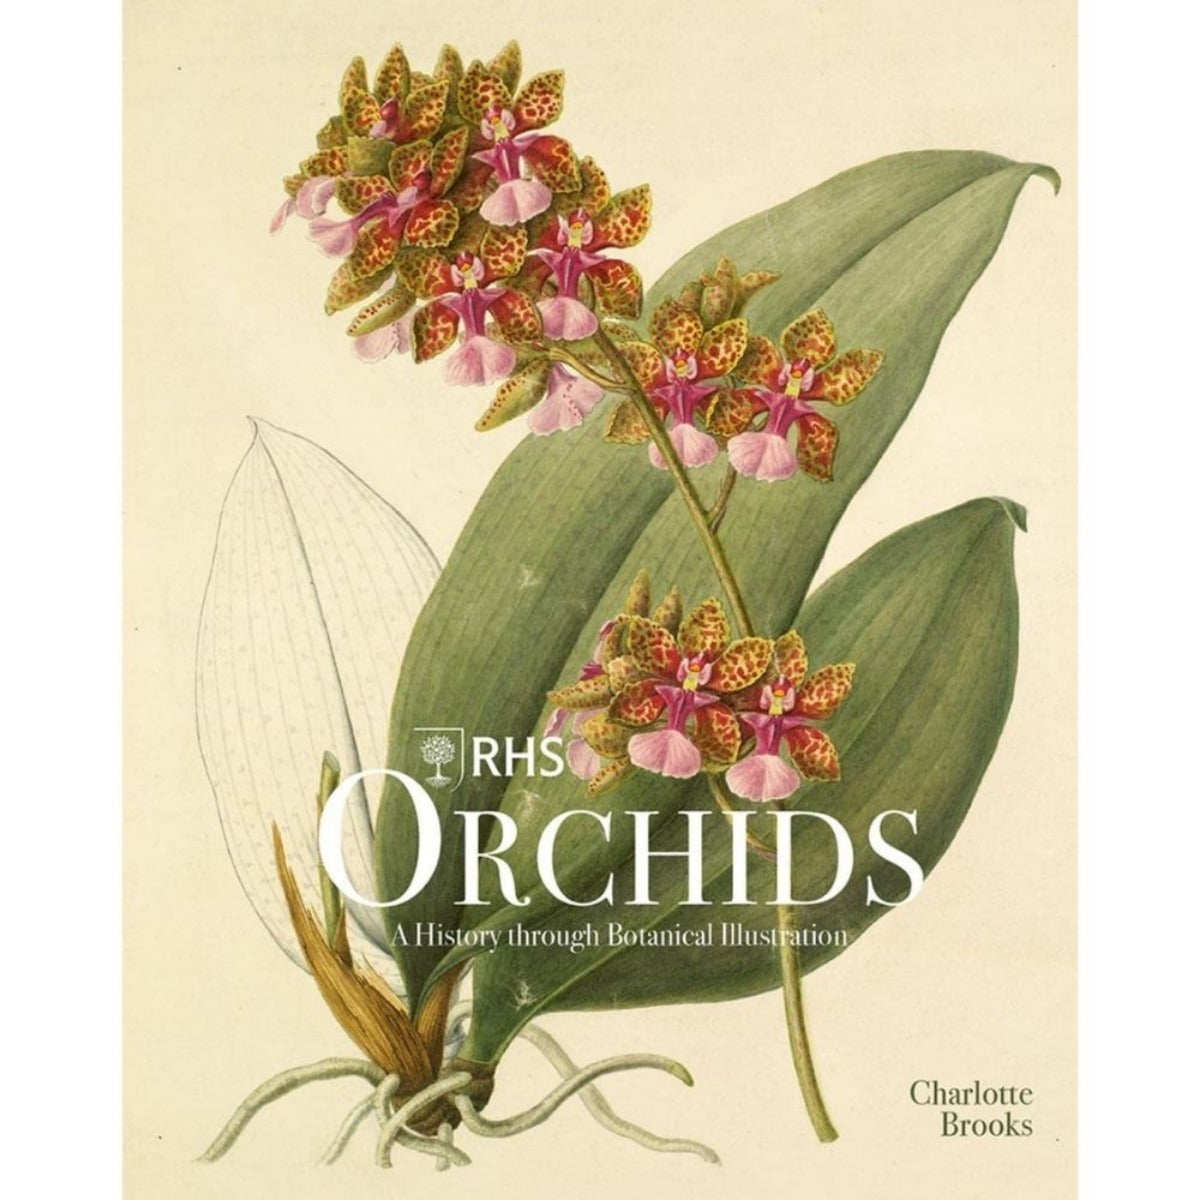 RHS Orchids by Charlotte Brooks